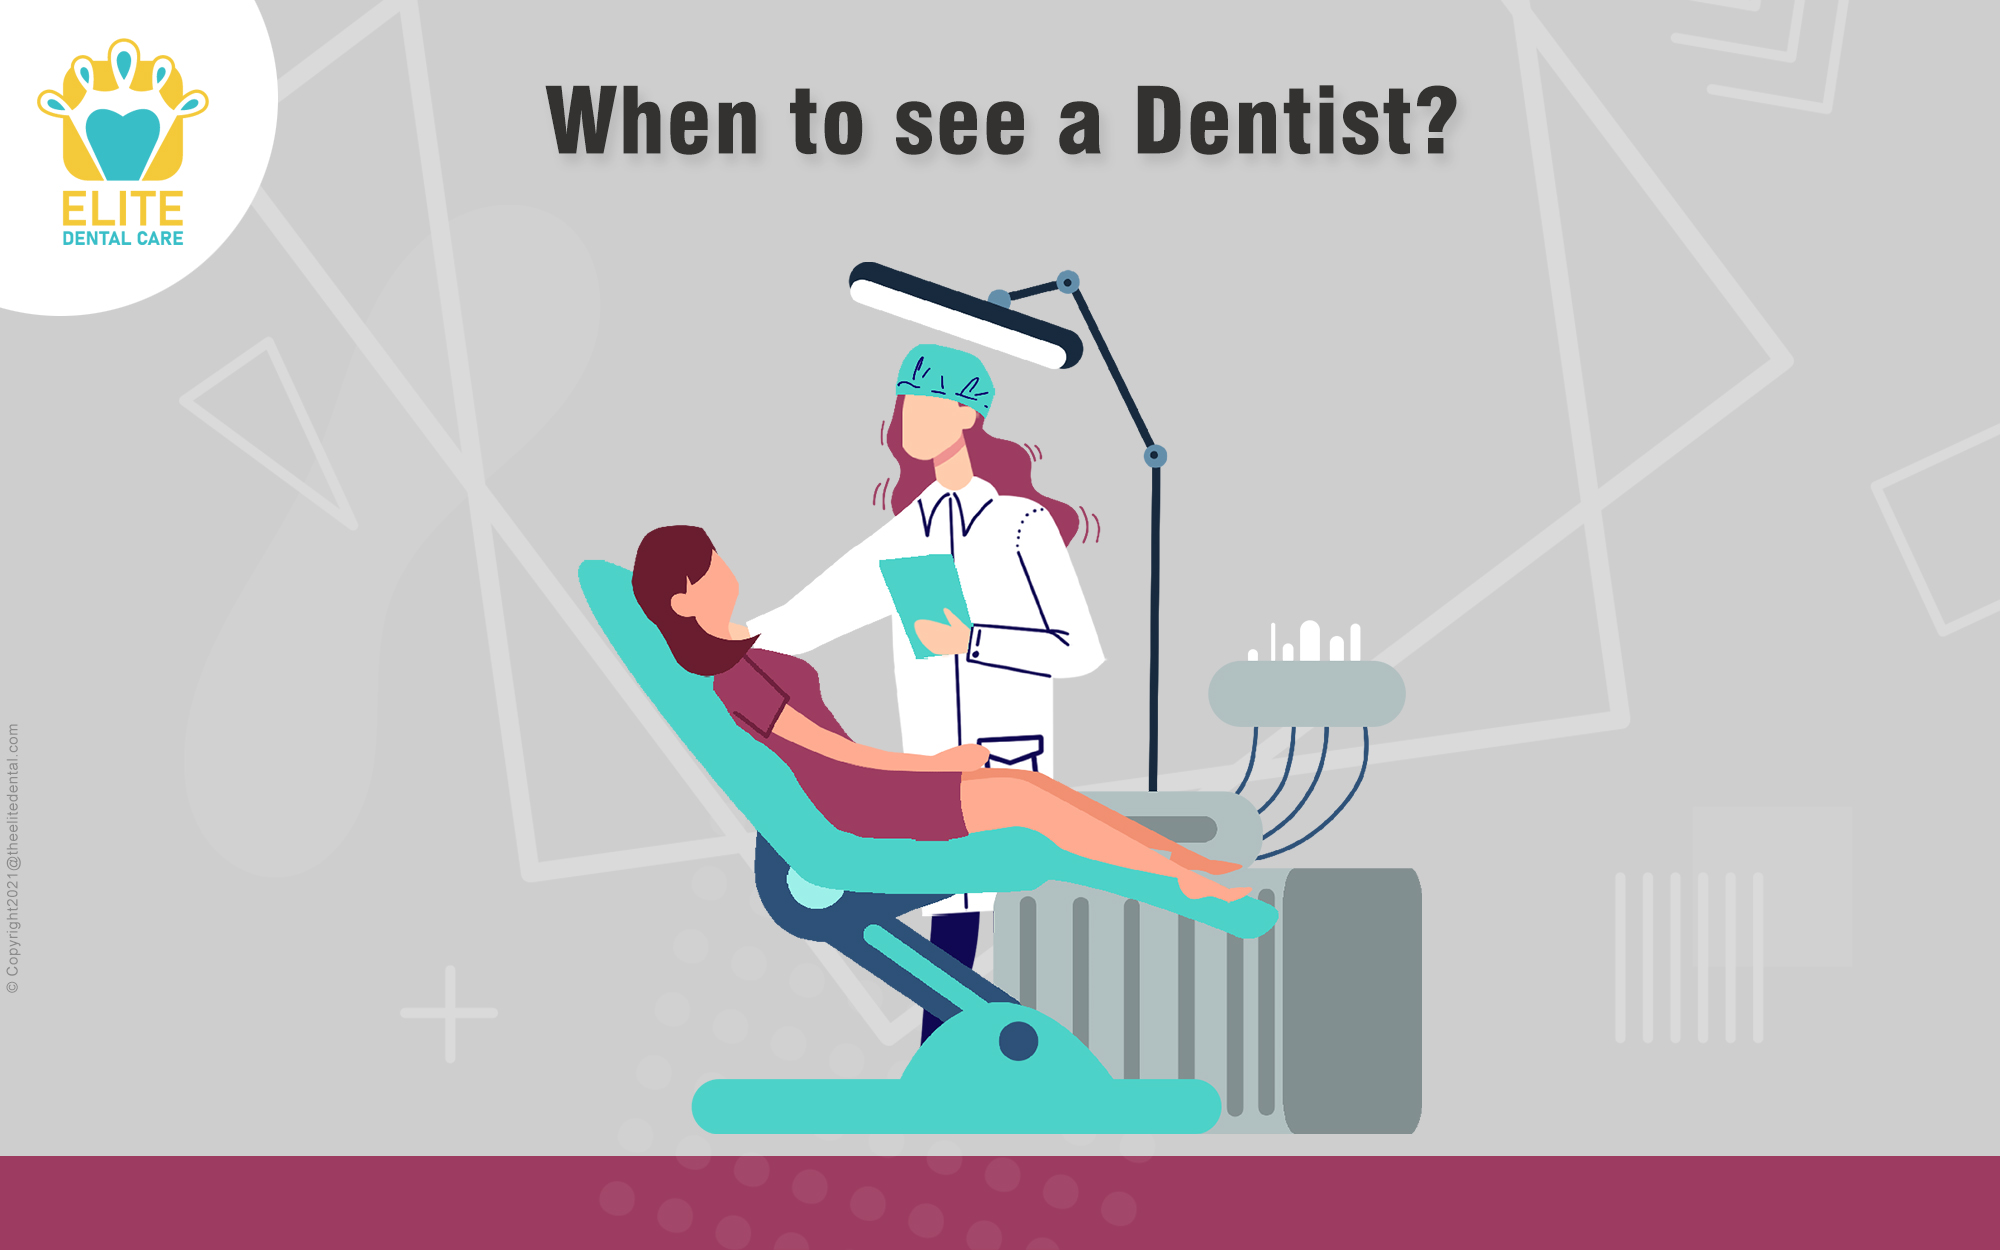 When to see a dentist?